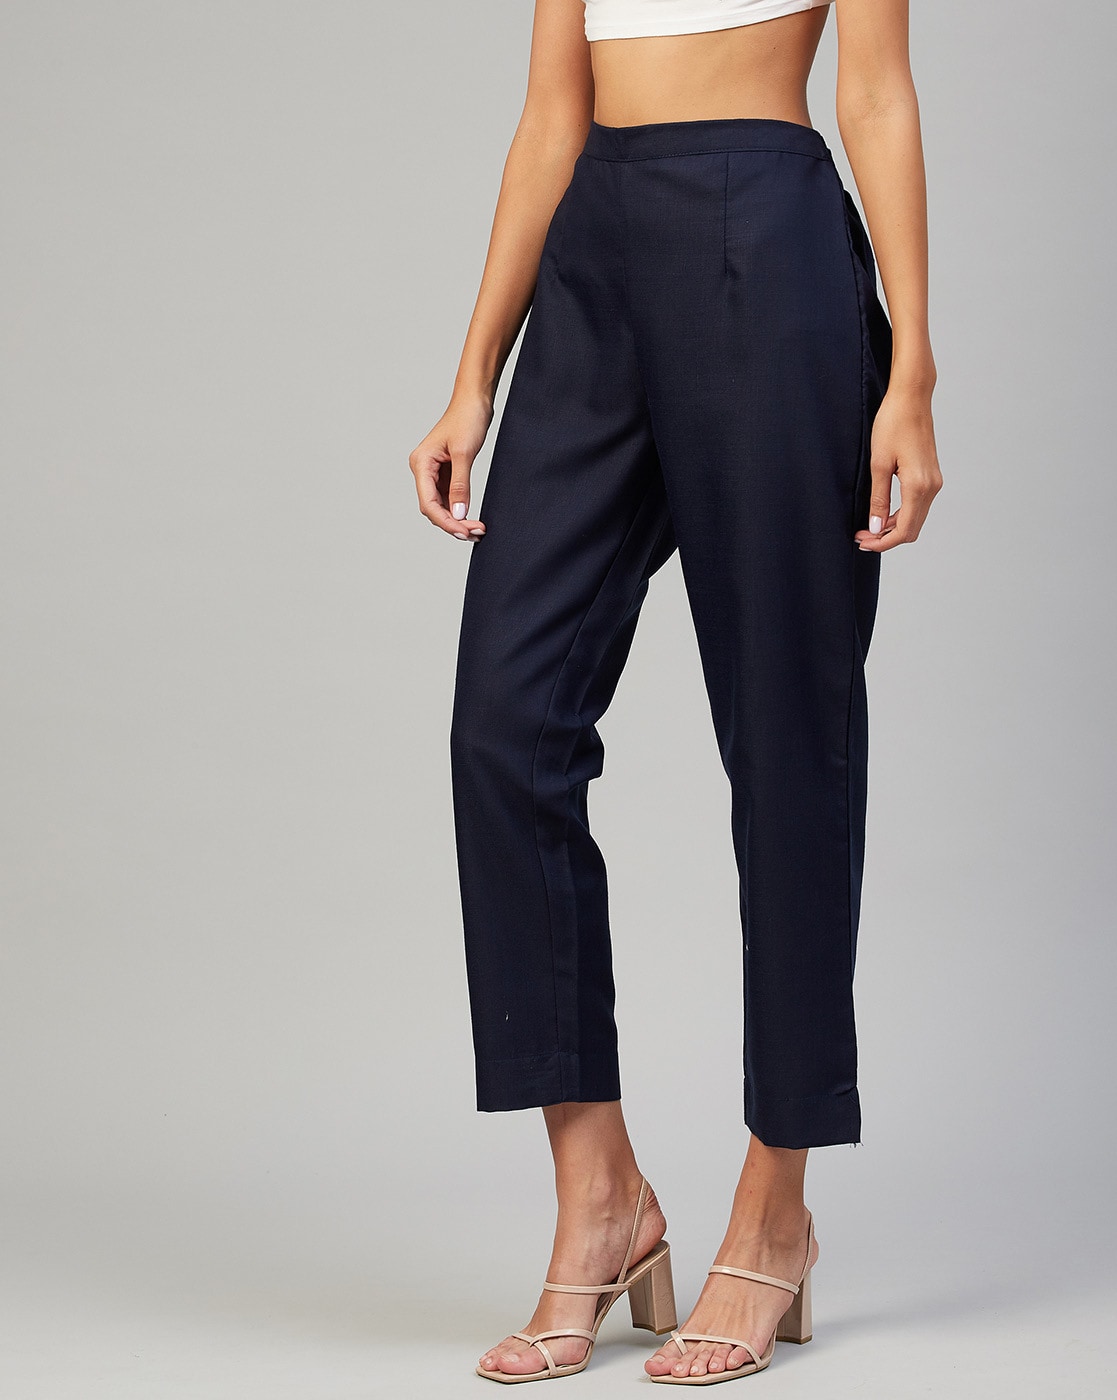 Buy Capri Trousers  Fast Home Delivery  Bonmarché